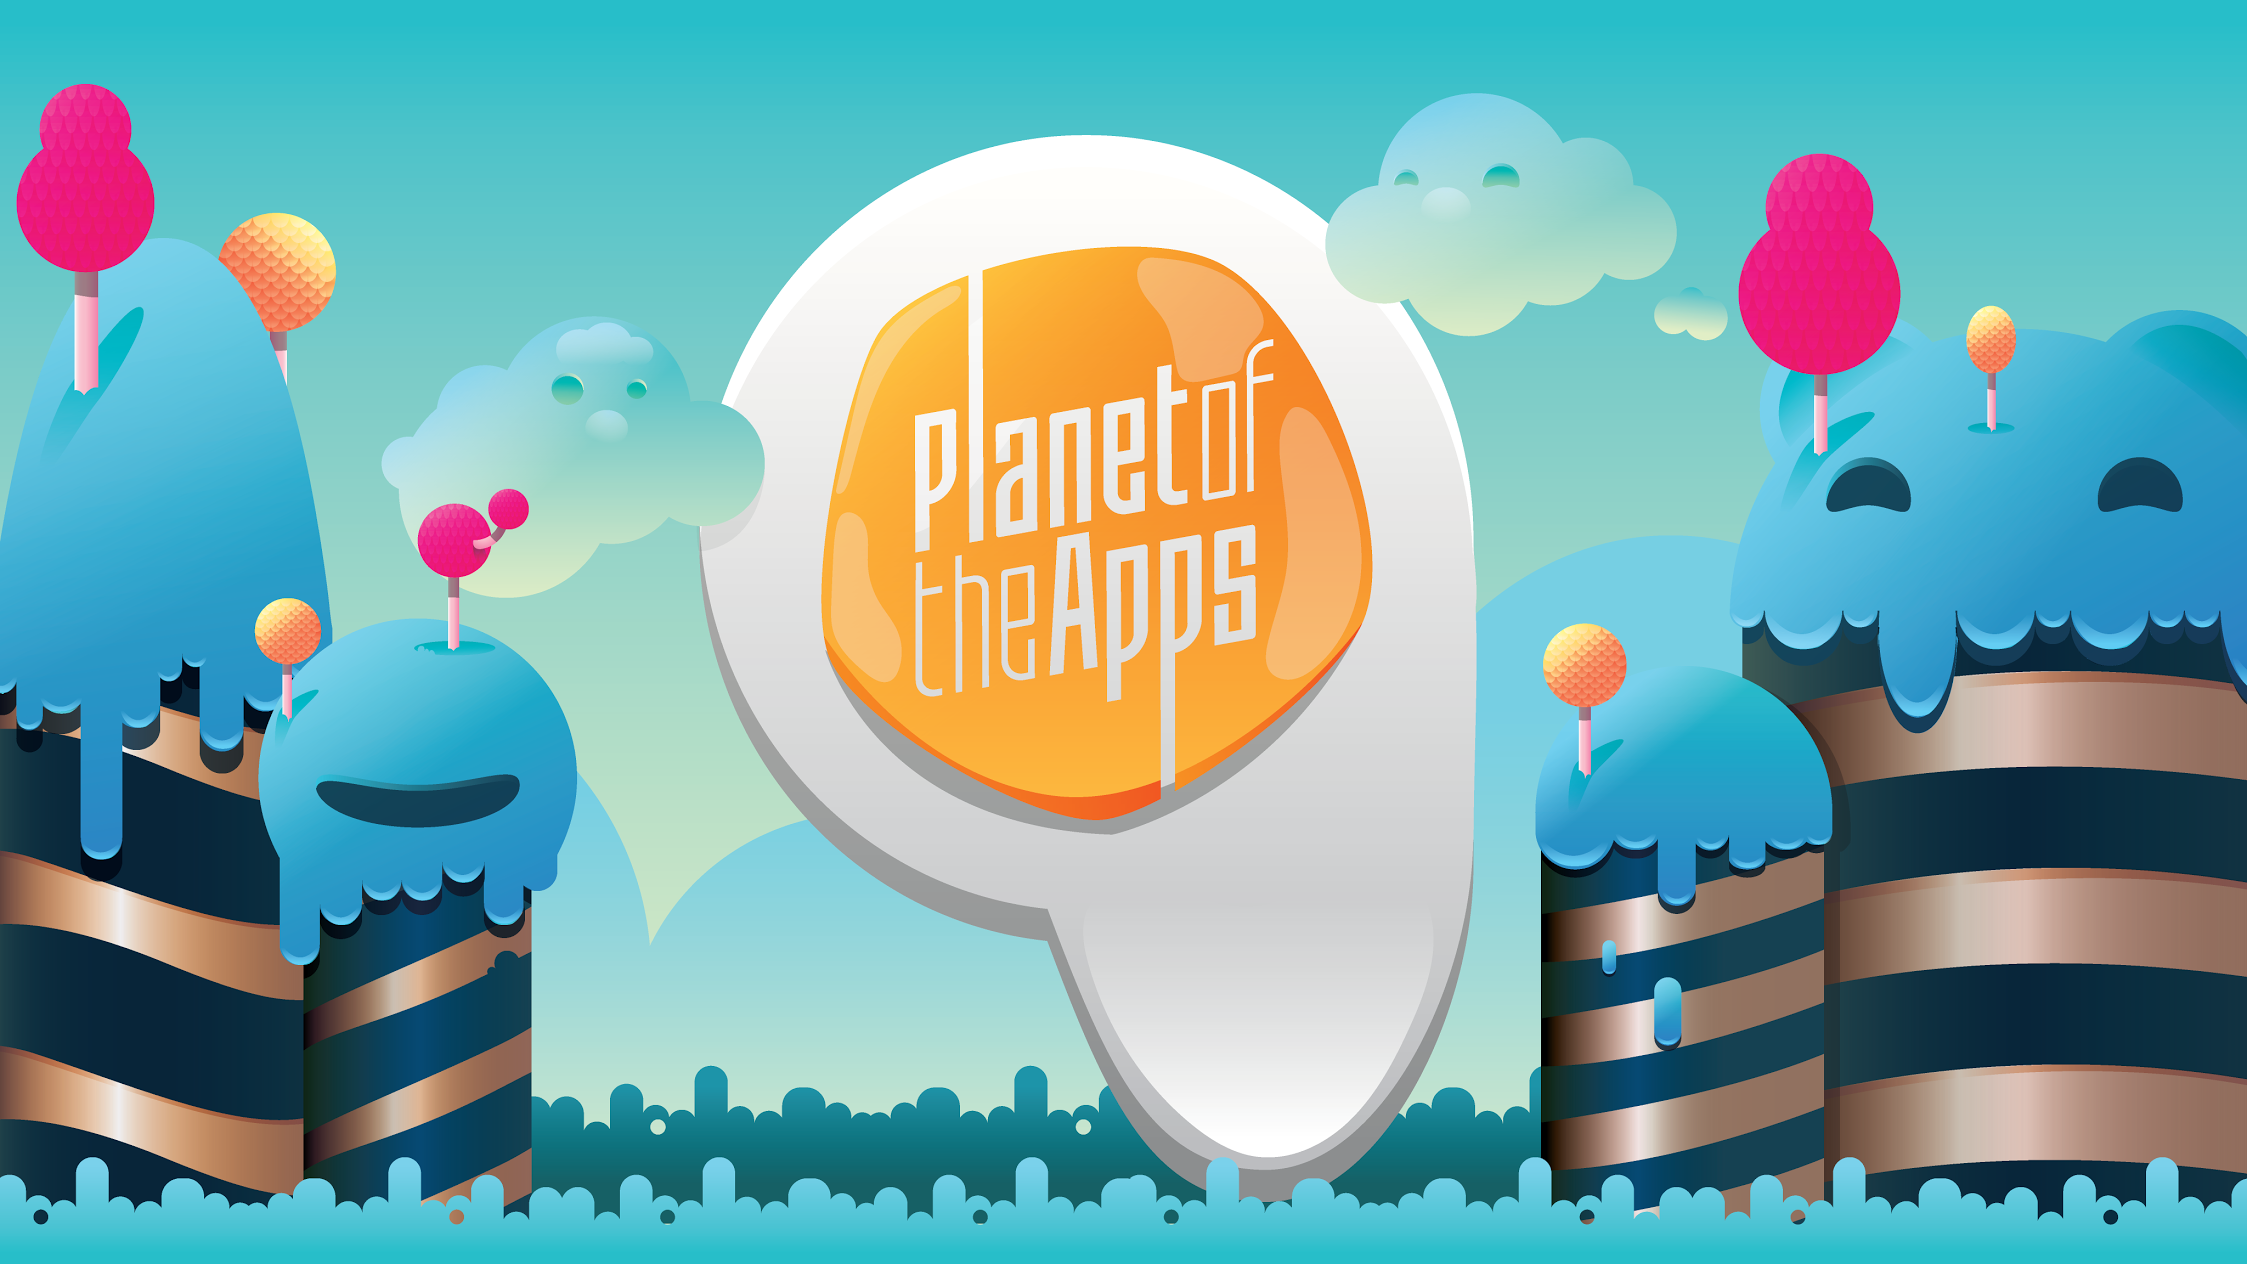 Planet of the Apps Limited